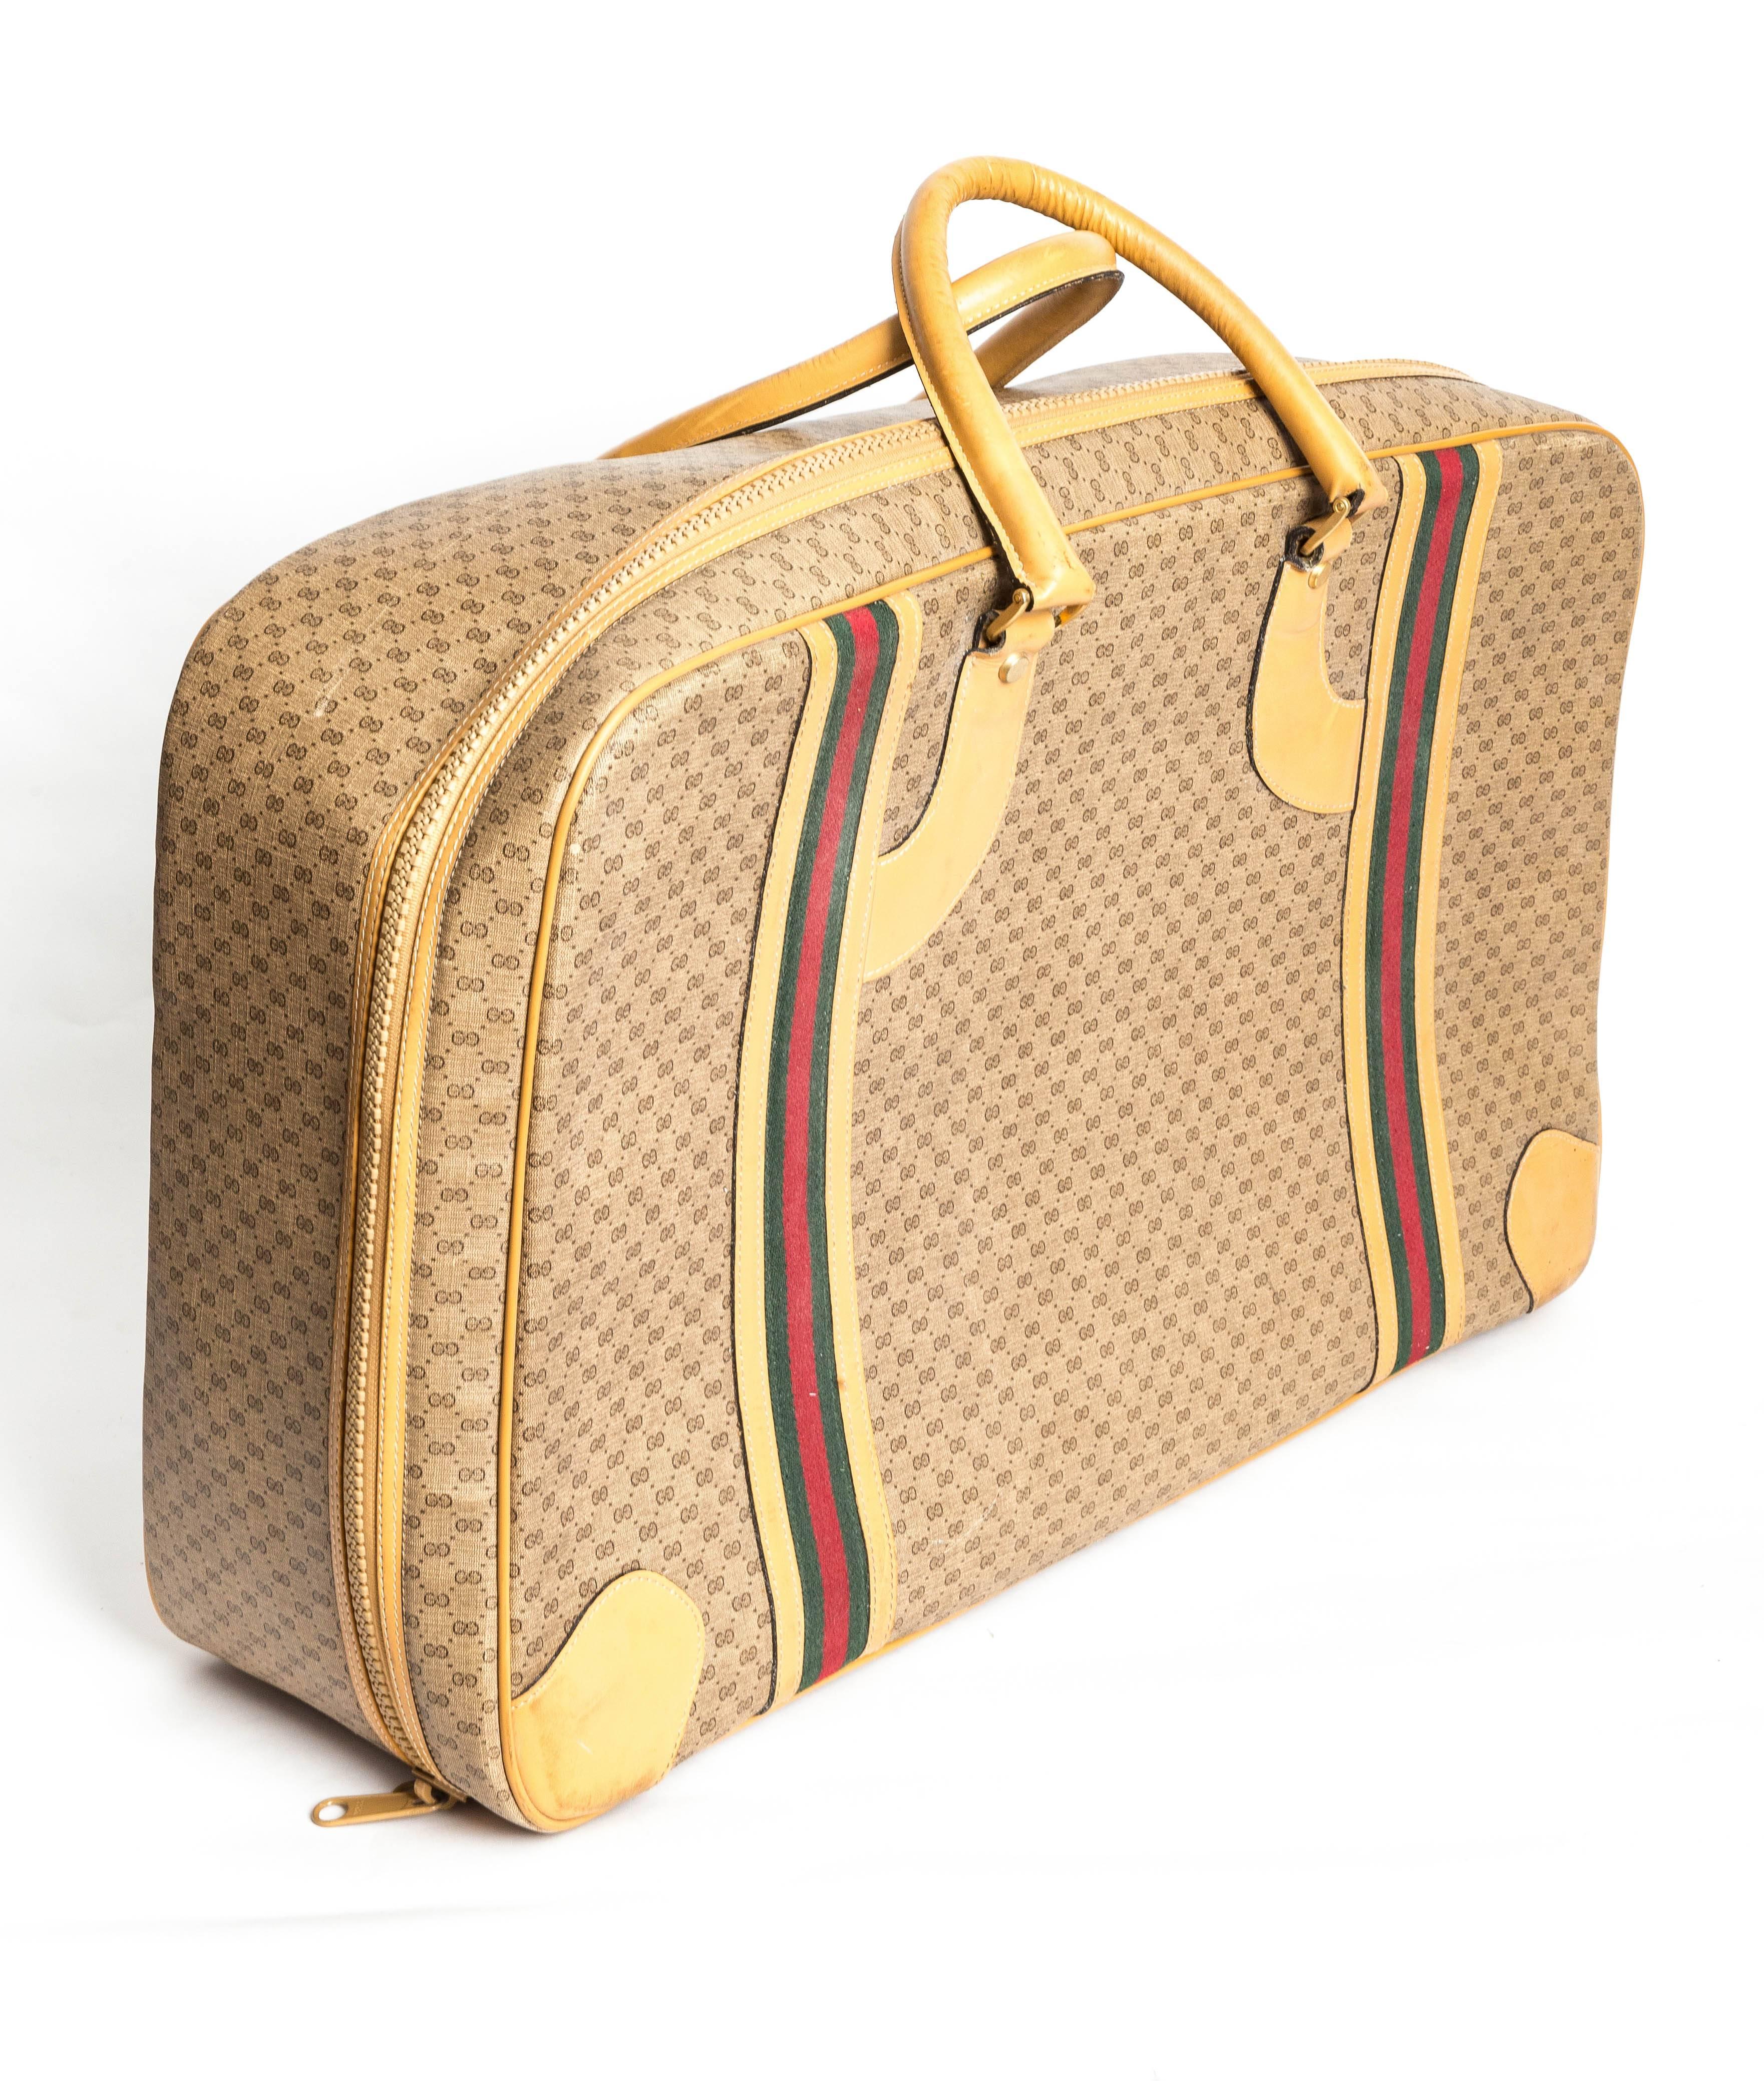 Fabulous Gucci Monogram Zip Suitcase withHeritage Stripe
Tan Logo Exterior with Tan Leather Handles 
Some Marks to Exterior and Interior
Heritage Striped Straps to Interior
25 inches wide x 15.5 inches high
